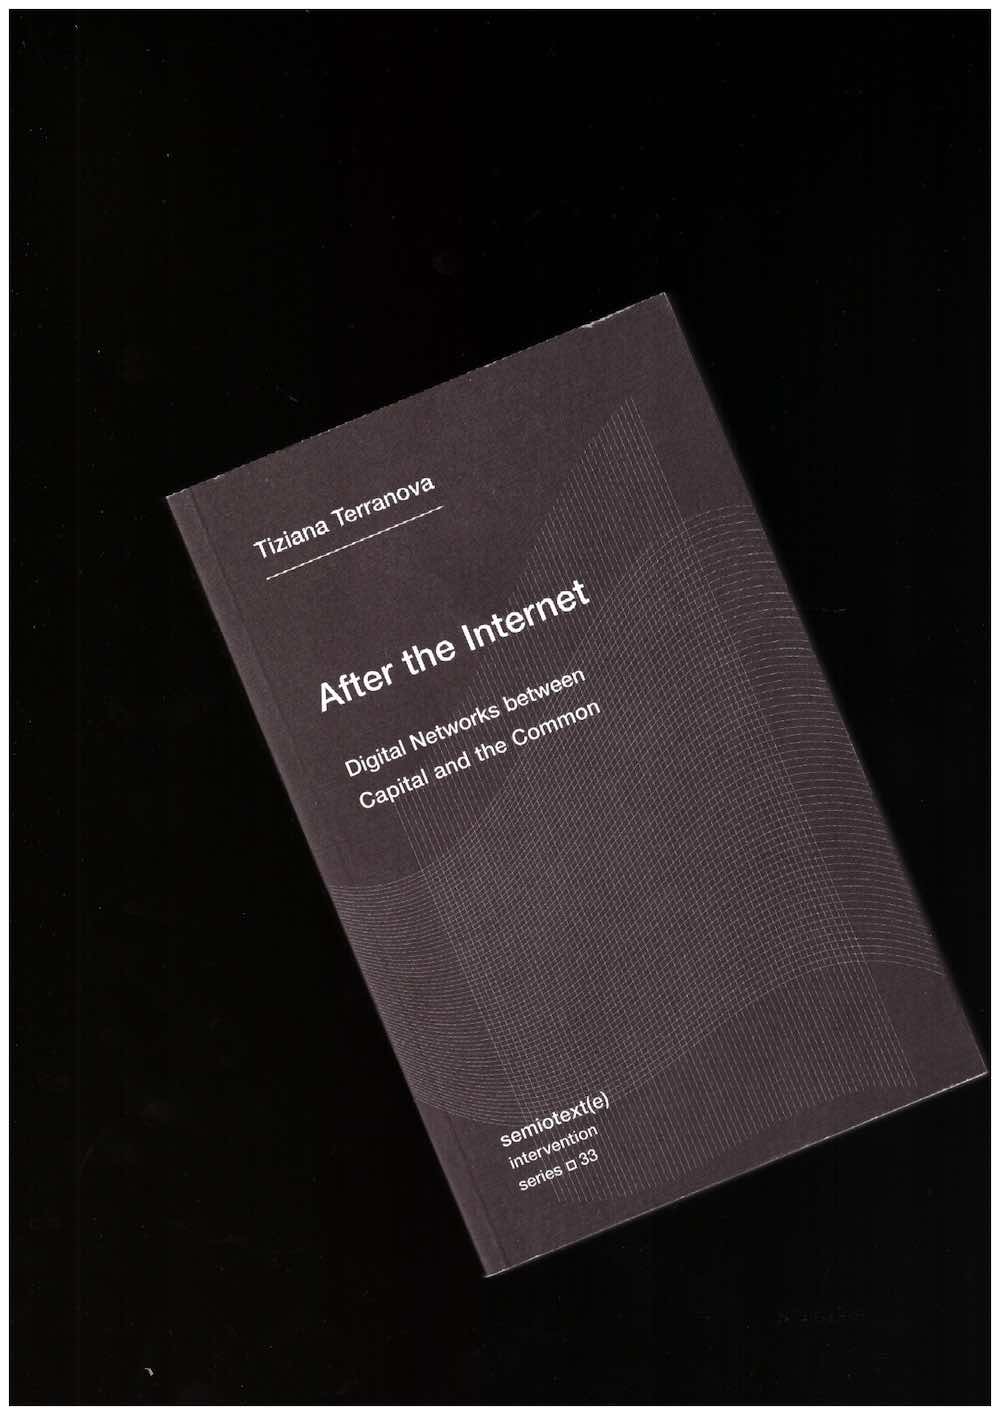 TERRANOVA, Tiziana - After the Internet. Digital Networks between Capital and the Commons